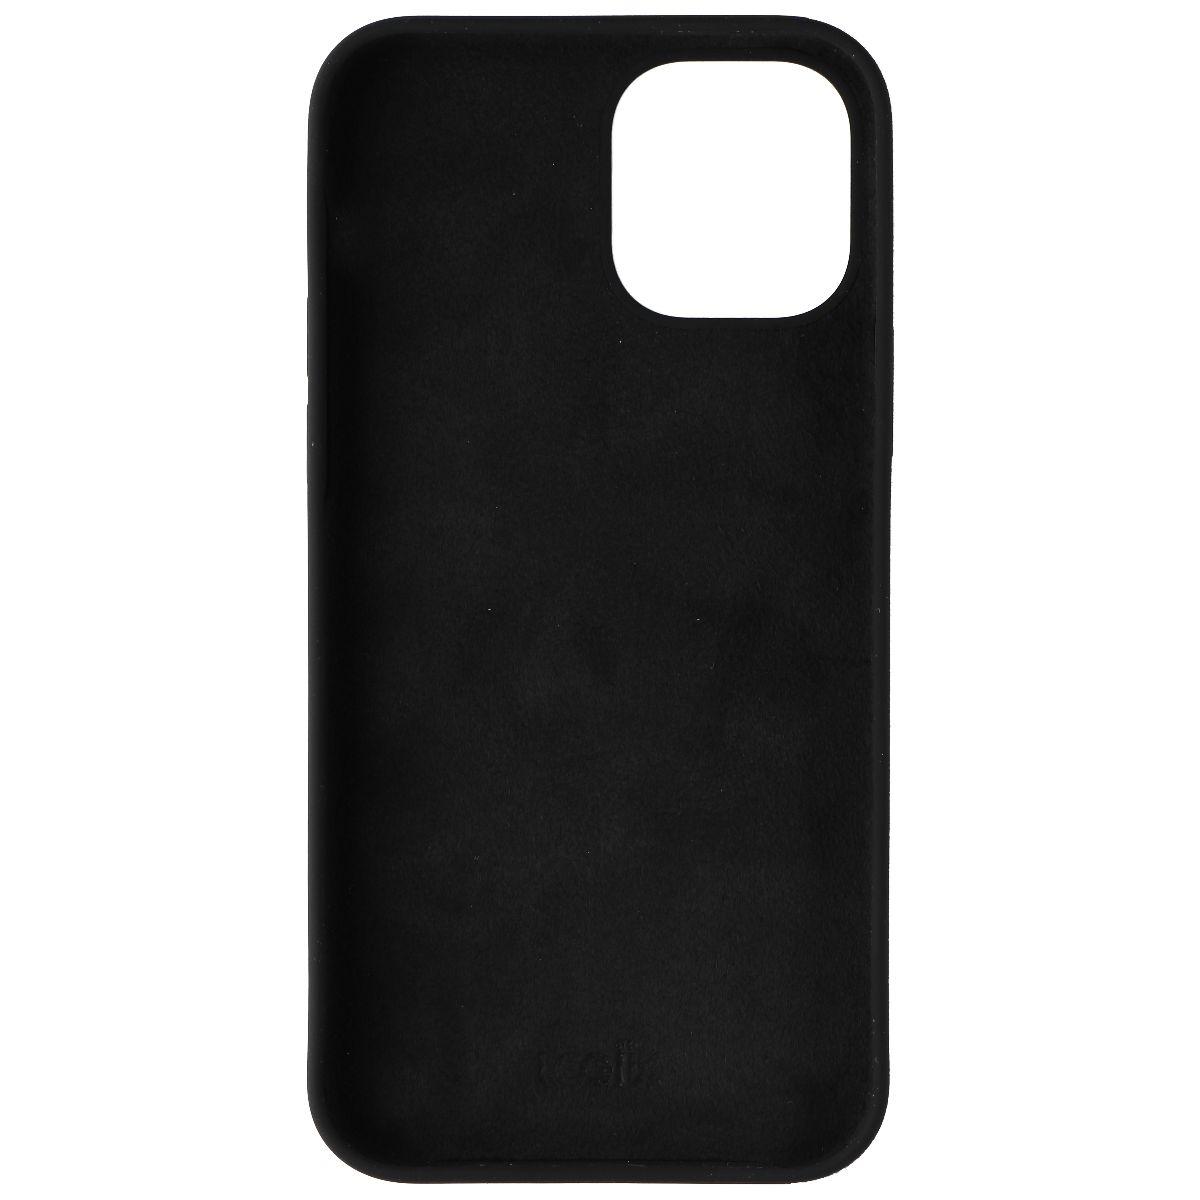 Logiix Silicone Case For Apple IPhone 12 And 12 Pro Smartphones - Black (Refurbished)